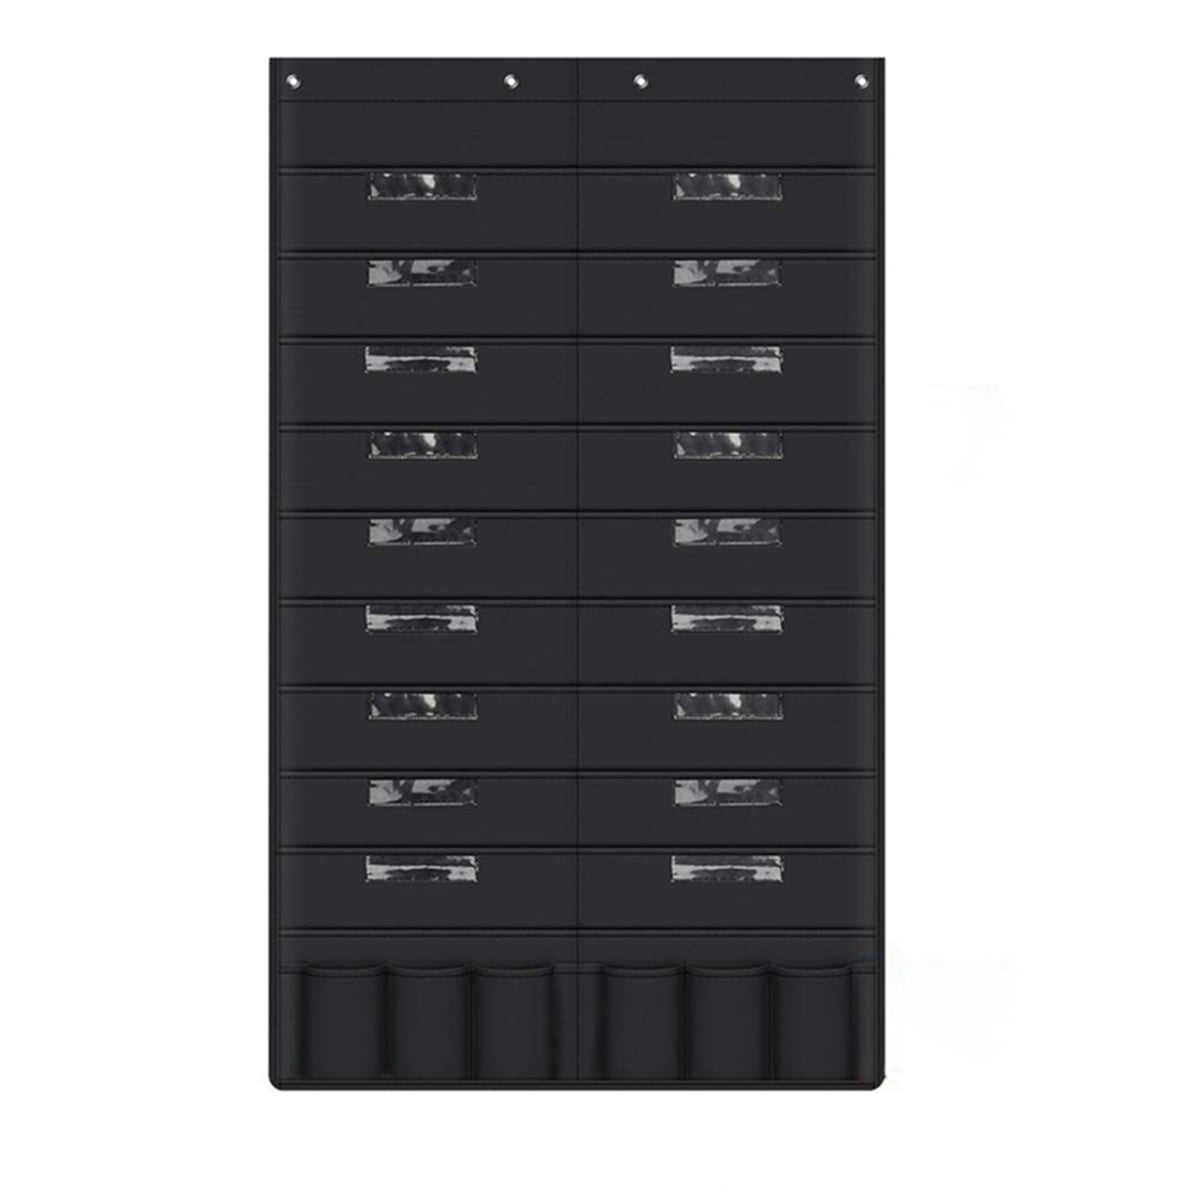 TOOGOO 20 Pocket Door Hanging File Organizer with Name Tag,Black Wall Storage Pocket Charts with 4 Hangers,Great for Classroom,School,Home Or Office Use